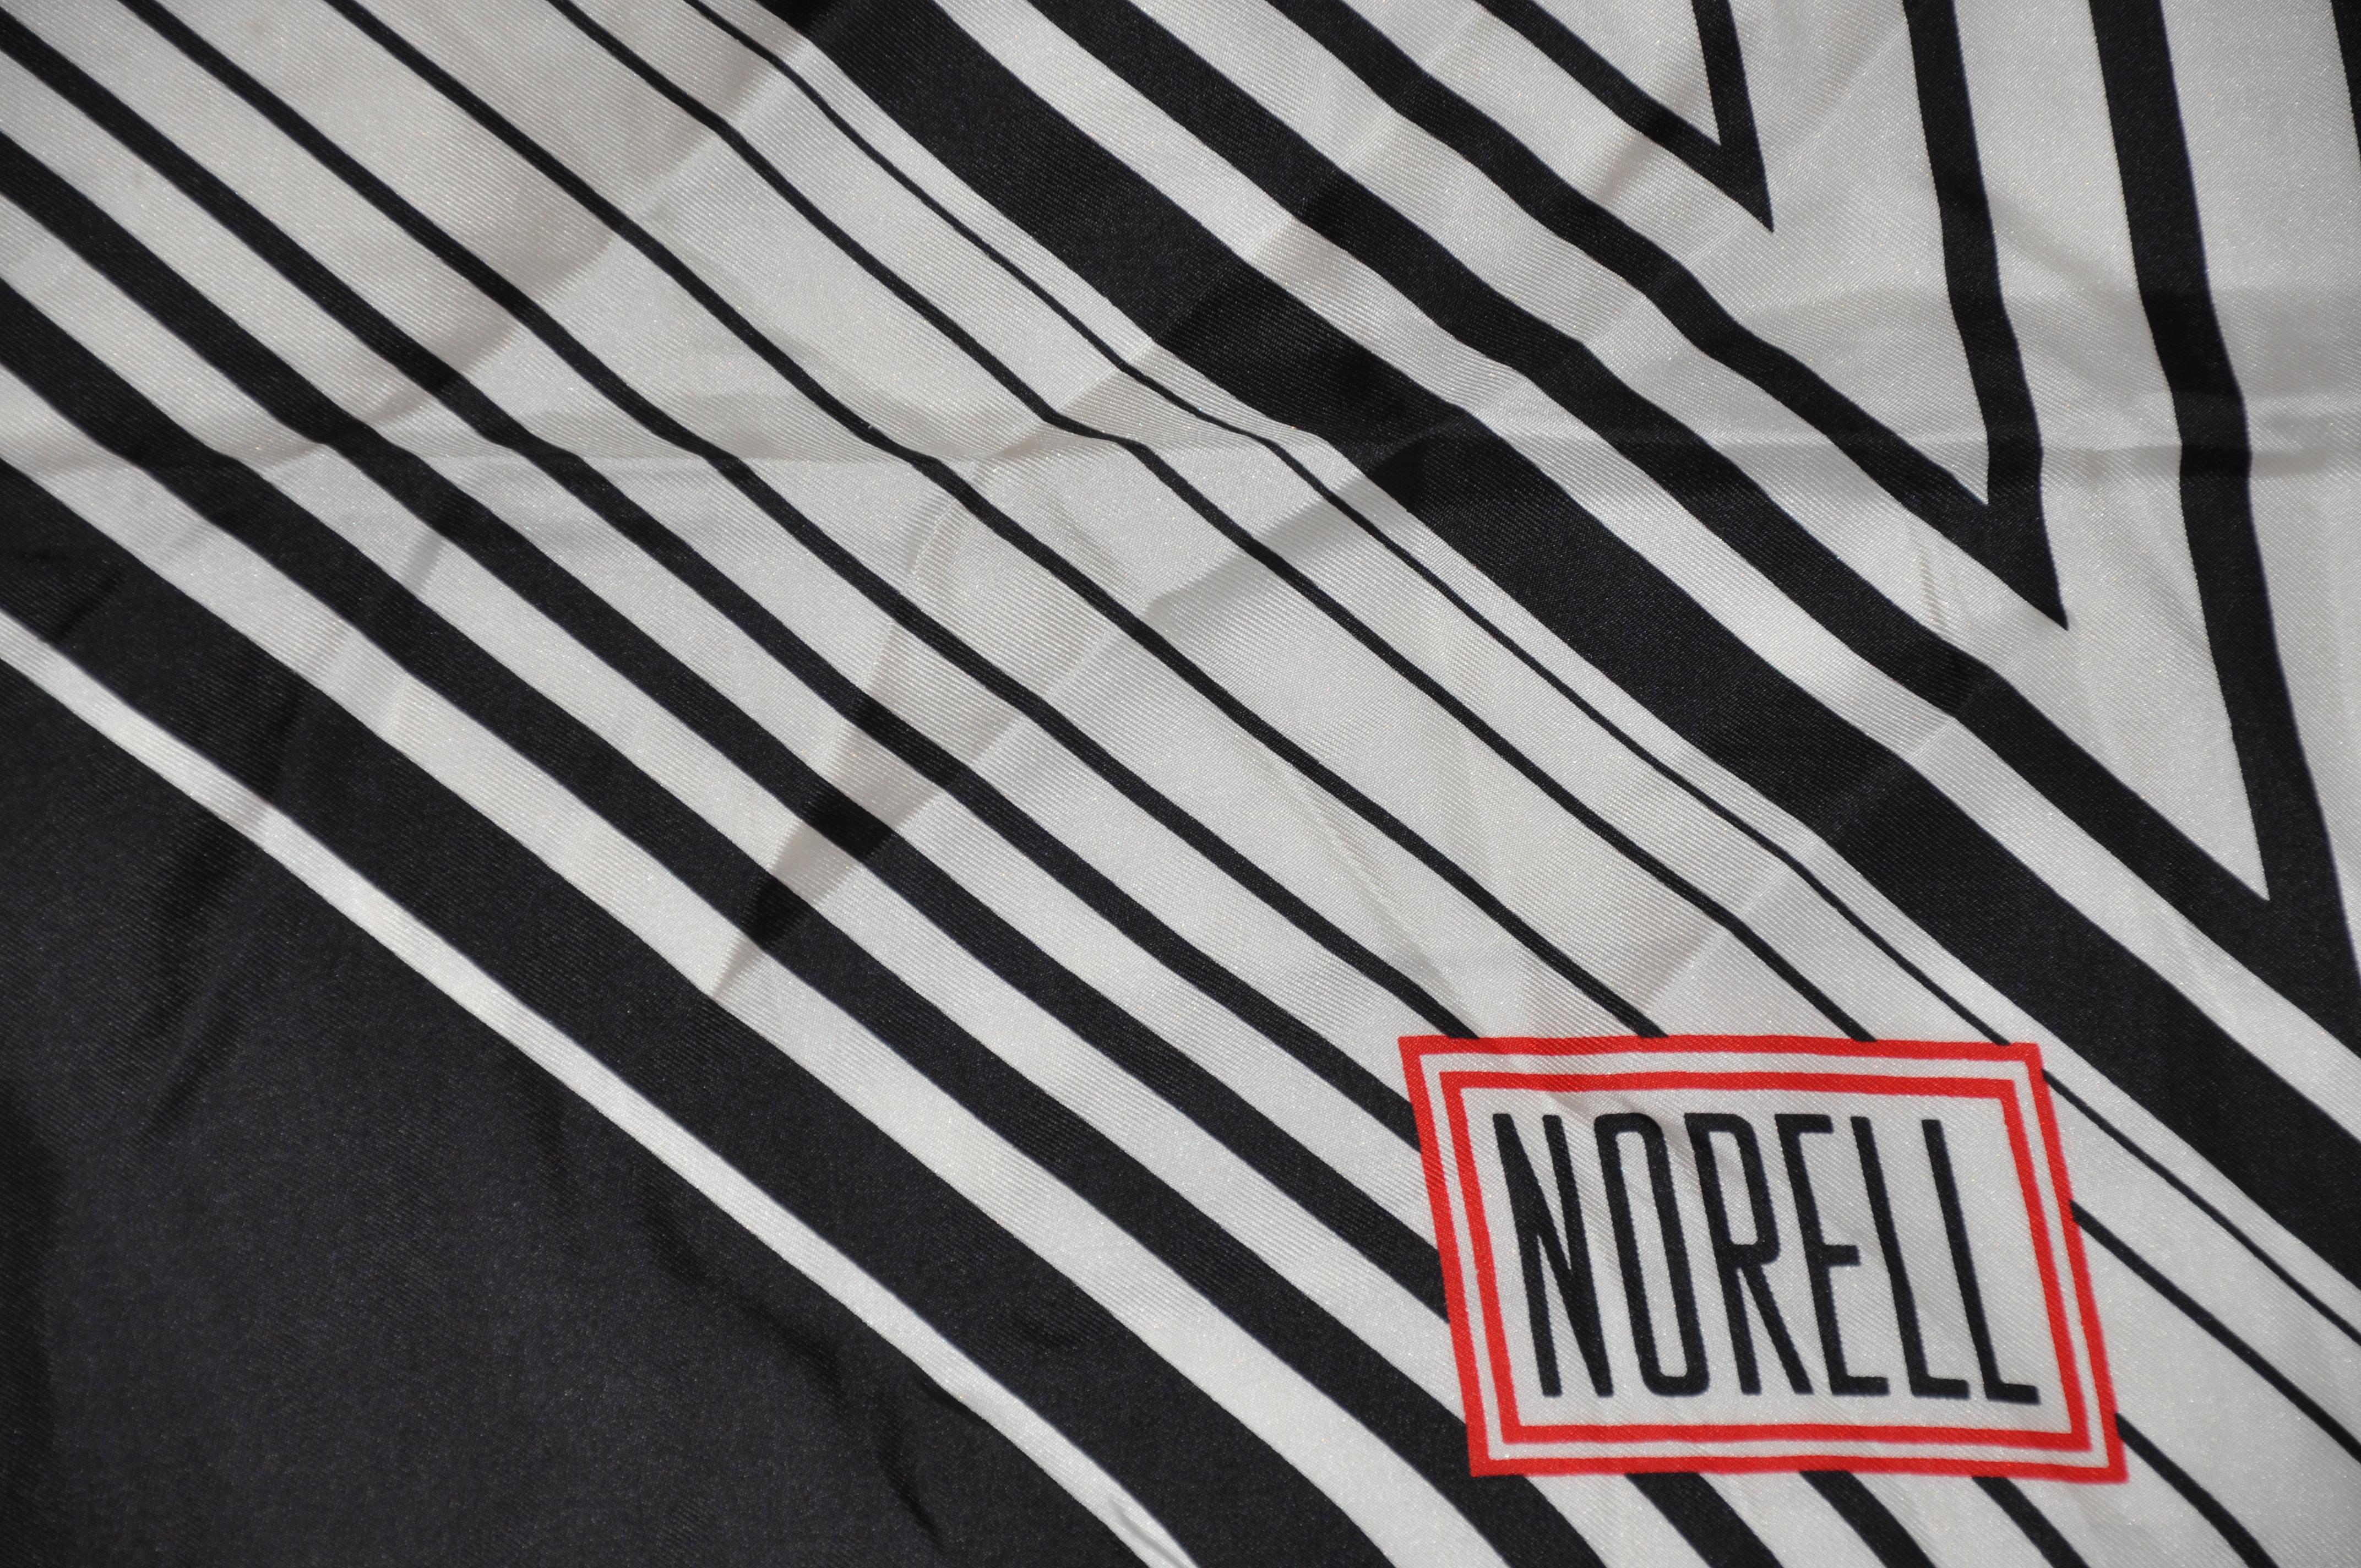       Iconic Norman Norell Black & White Signature Silk scarf accented with Hand-rolled edges, measures 26 inches by 26 inches. Made in Italy.